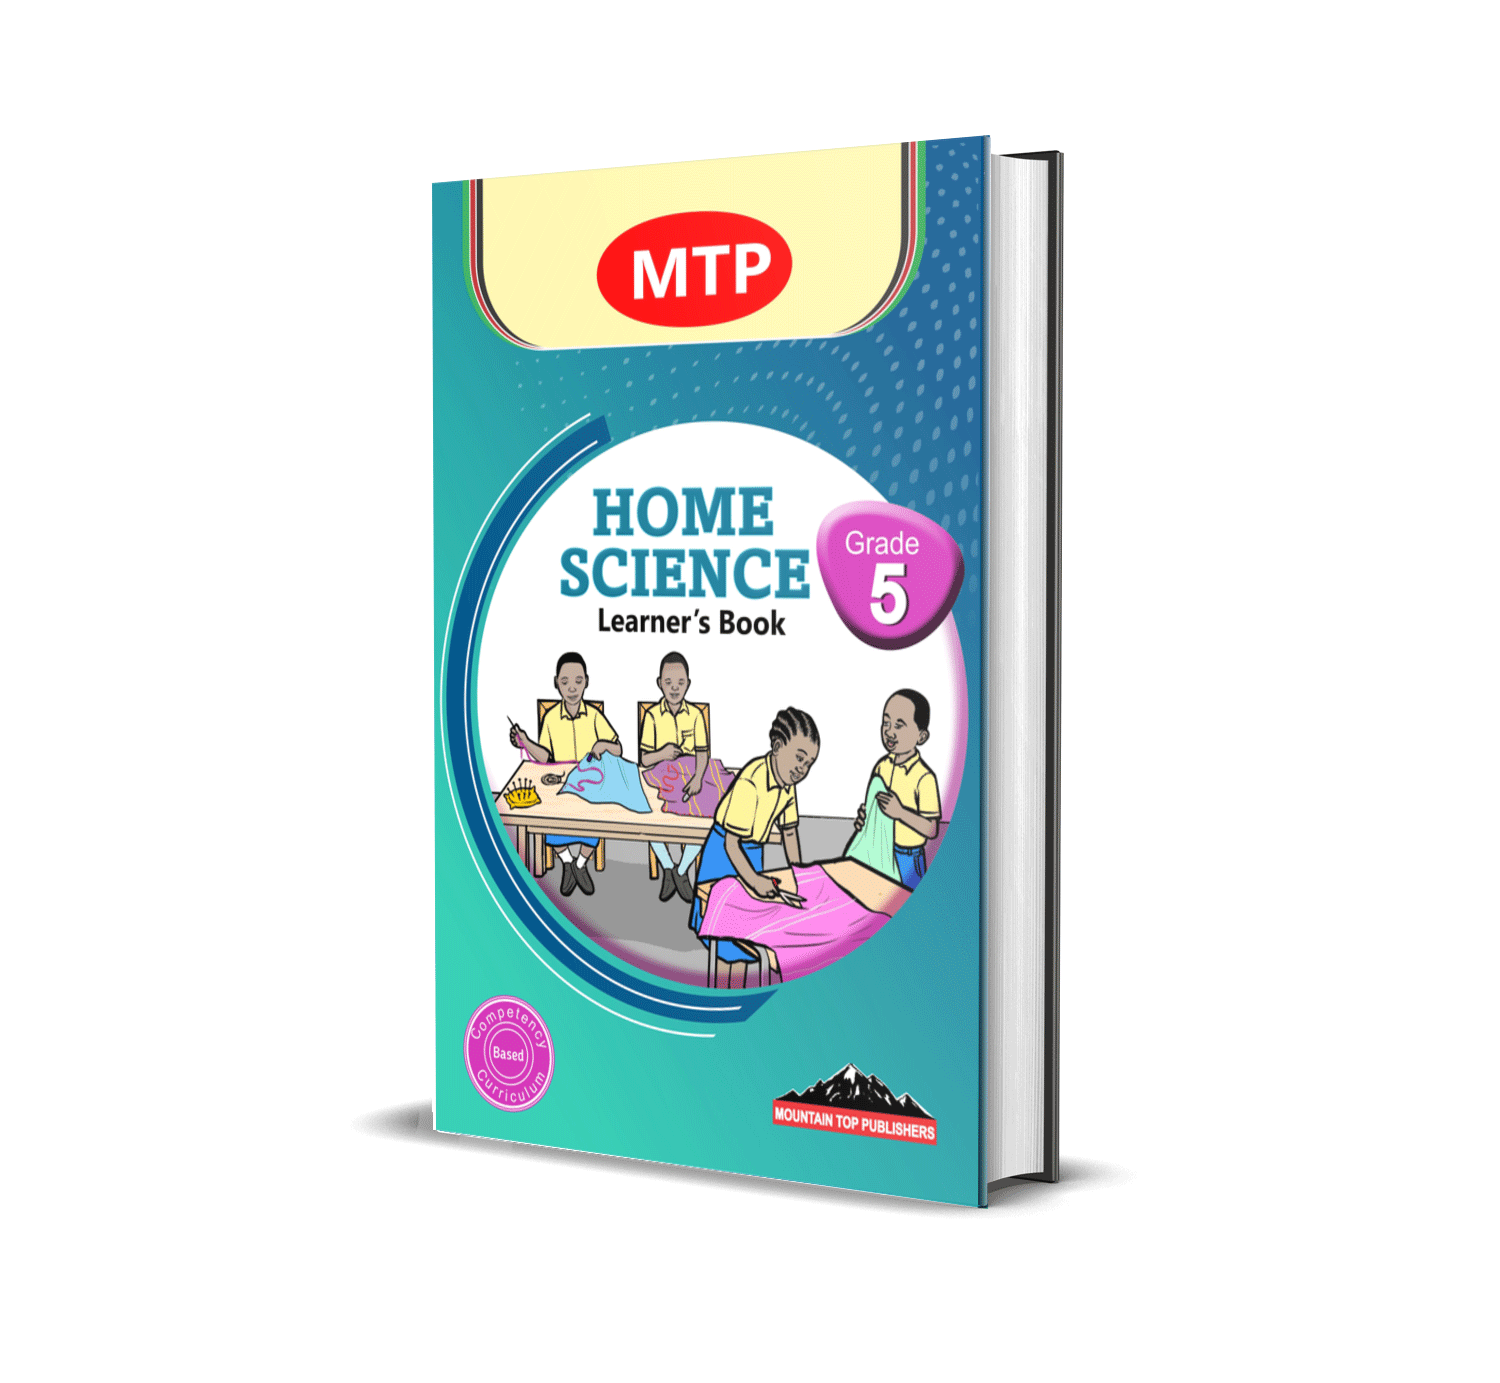 MTP Home Science Grade 5